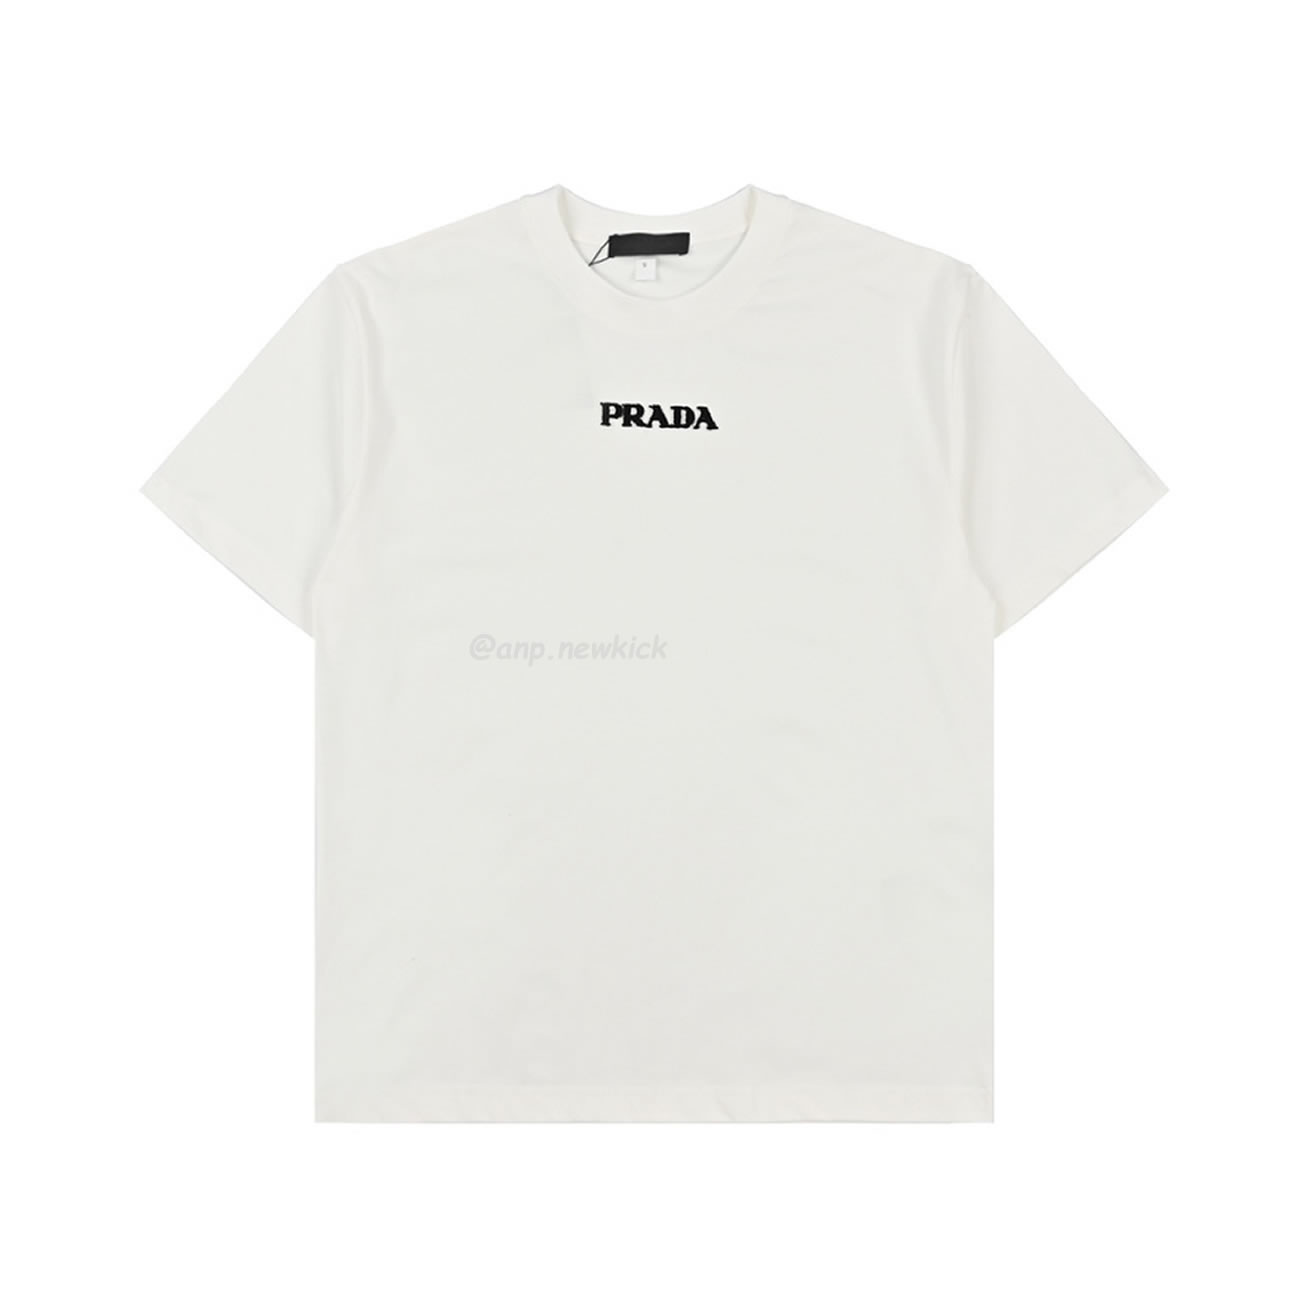 Prada 24ss 3d Toothbrush Embroidered Short Sleeves T Shirt (2) - newkick.org